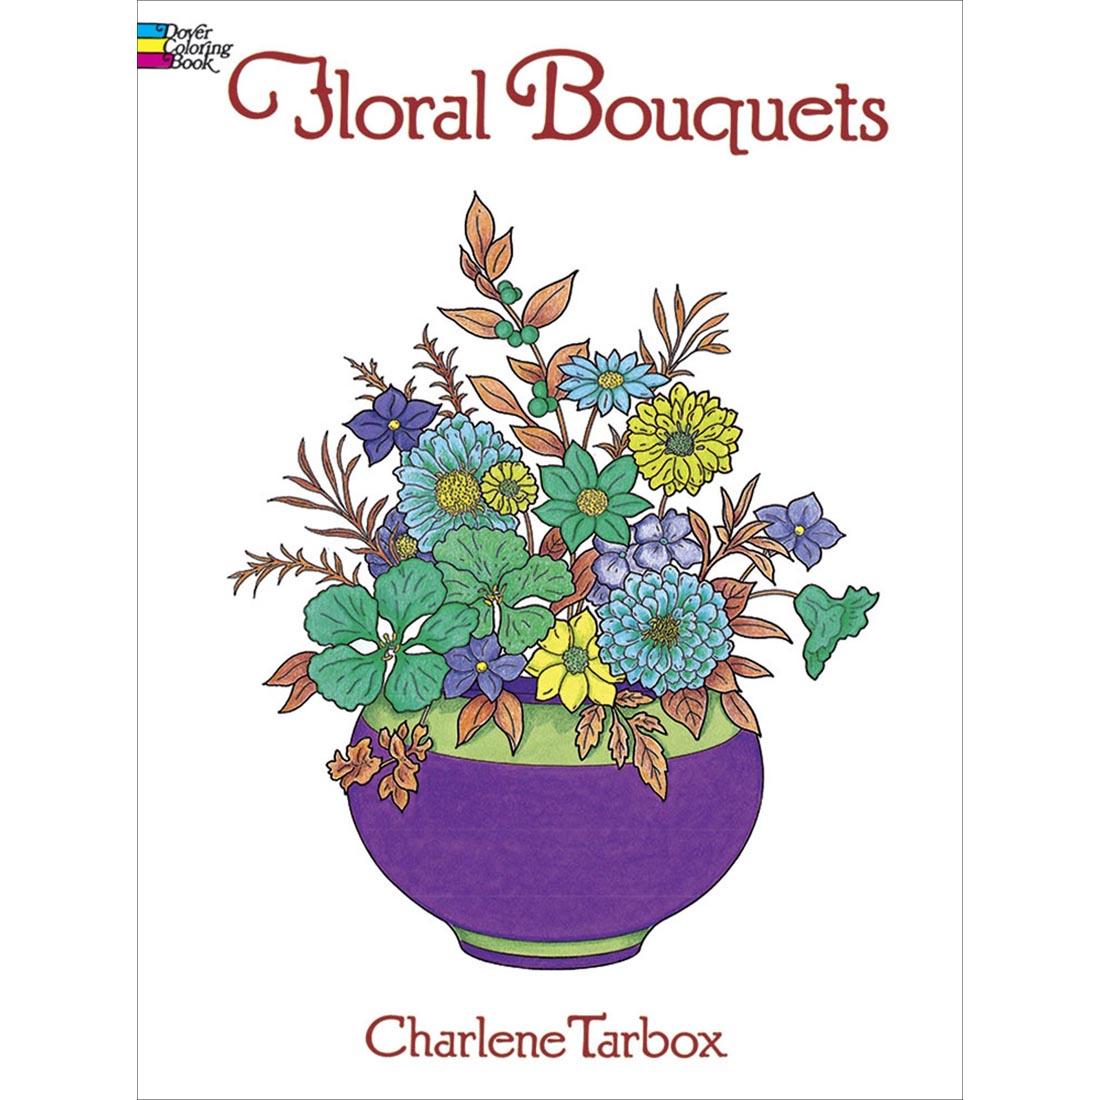 Floral Bouquets Coloring Book by Dover